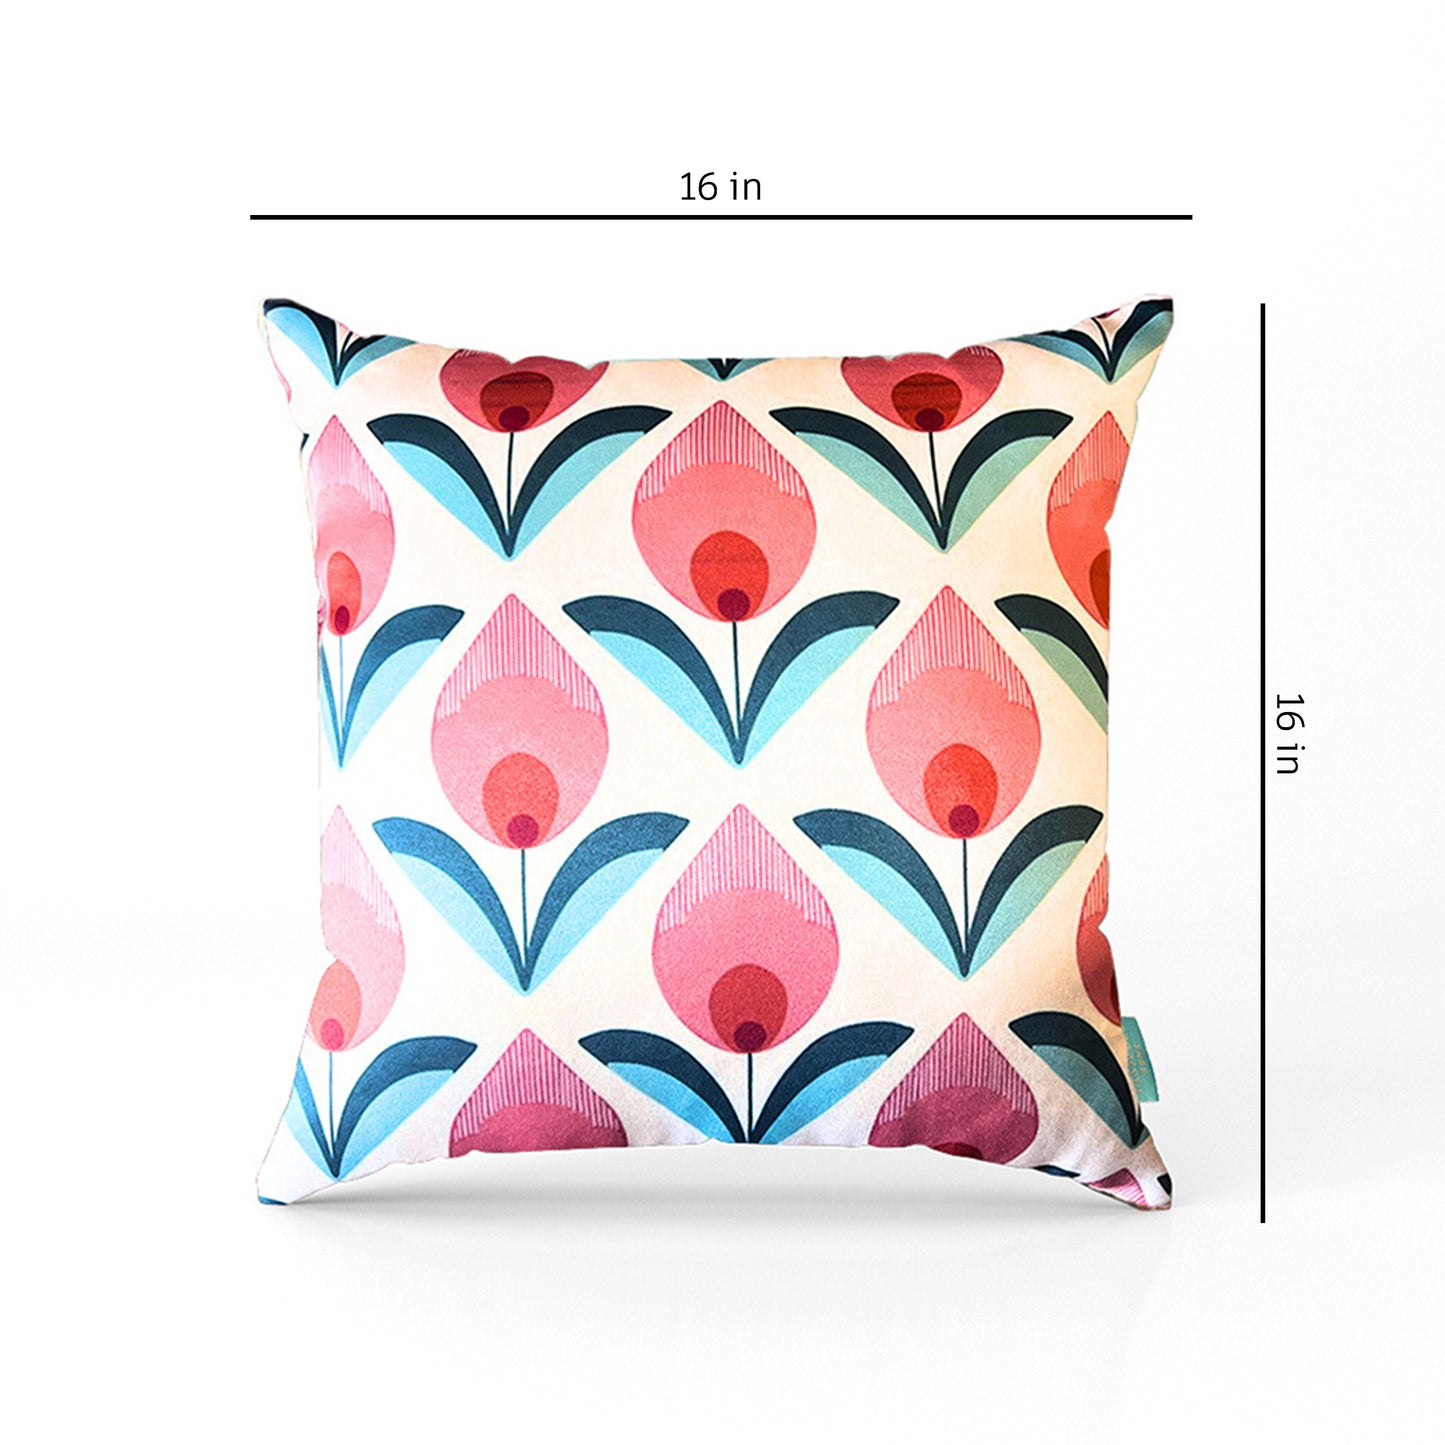 Pitter Flower Cushion Covers